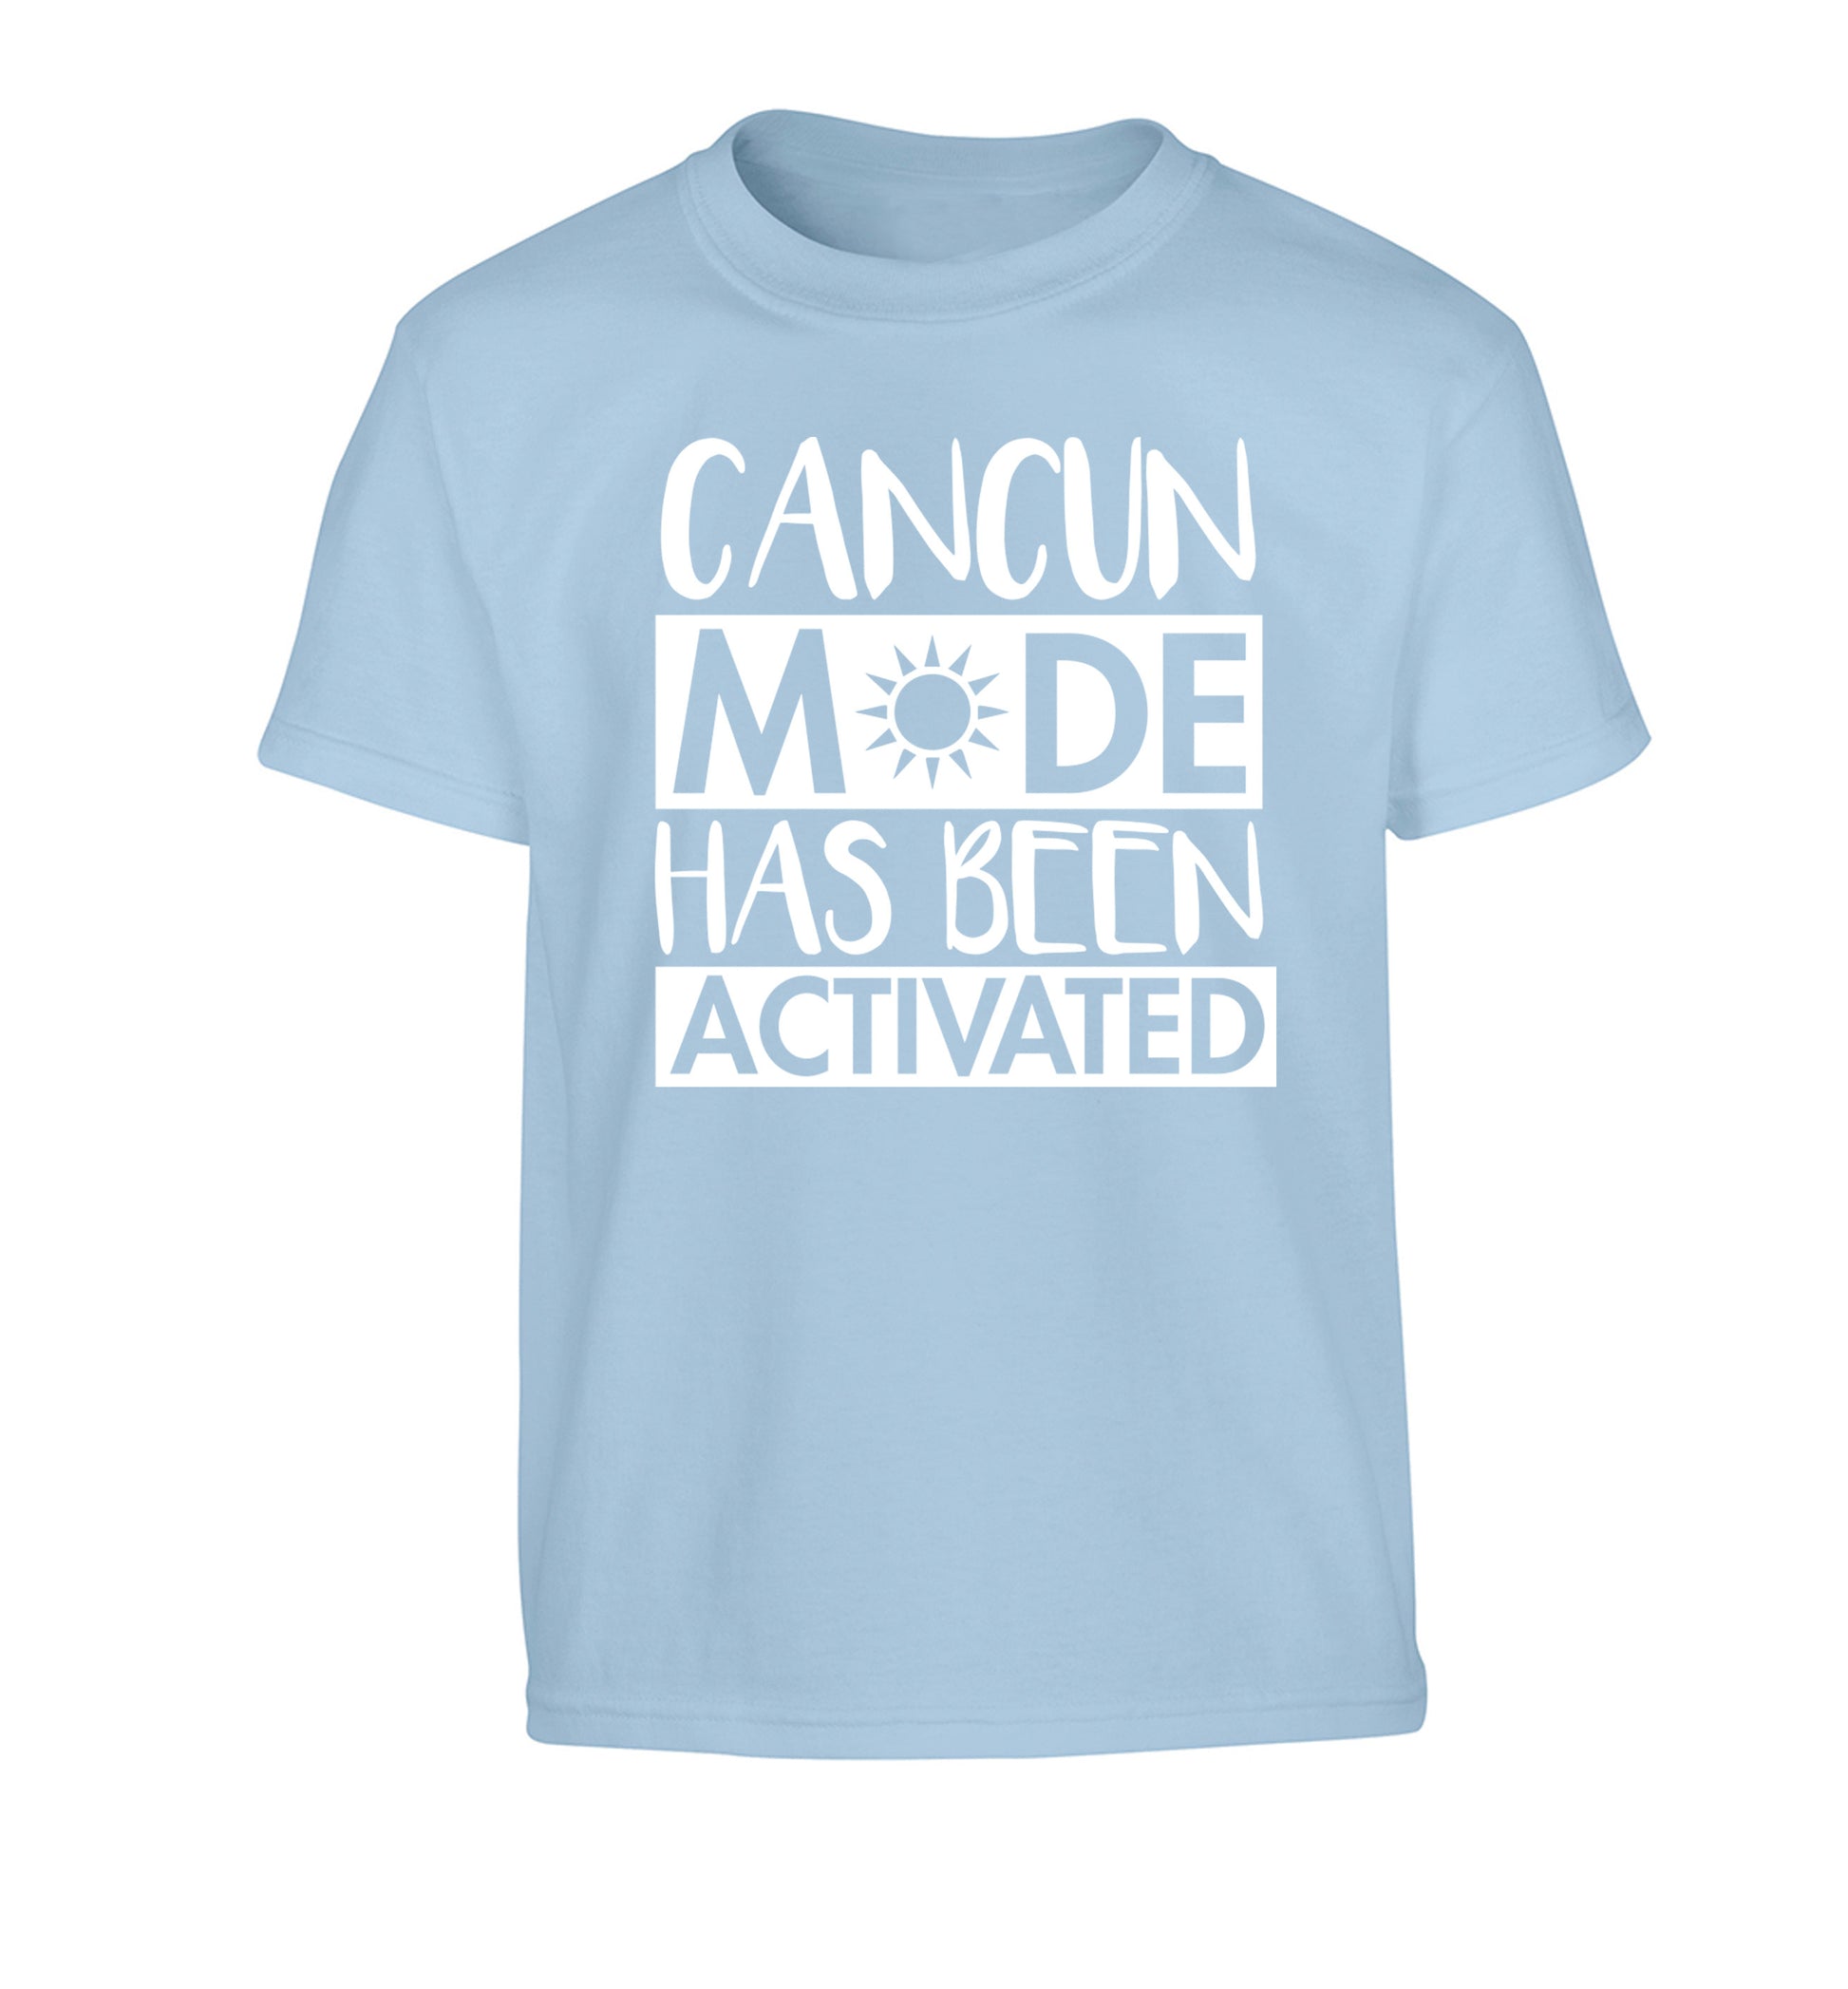 Cancun mode has been activated Children's light blue Tshirt 12-14 Years